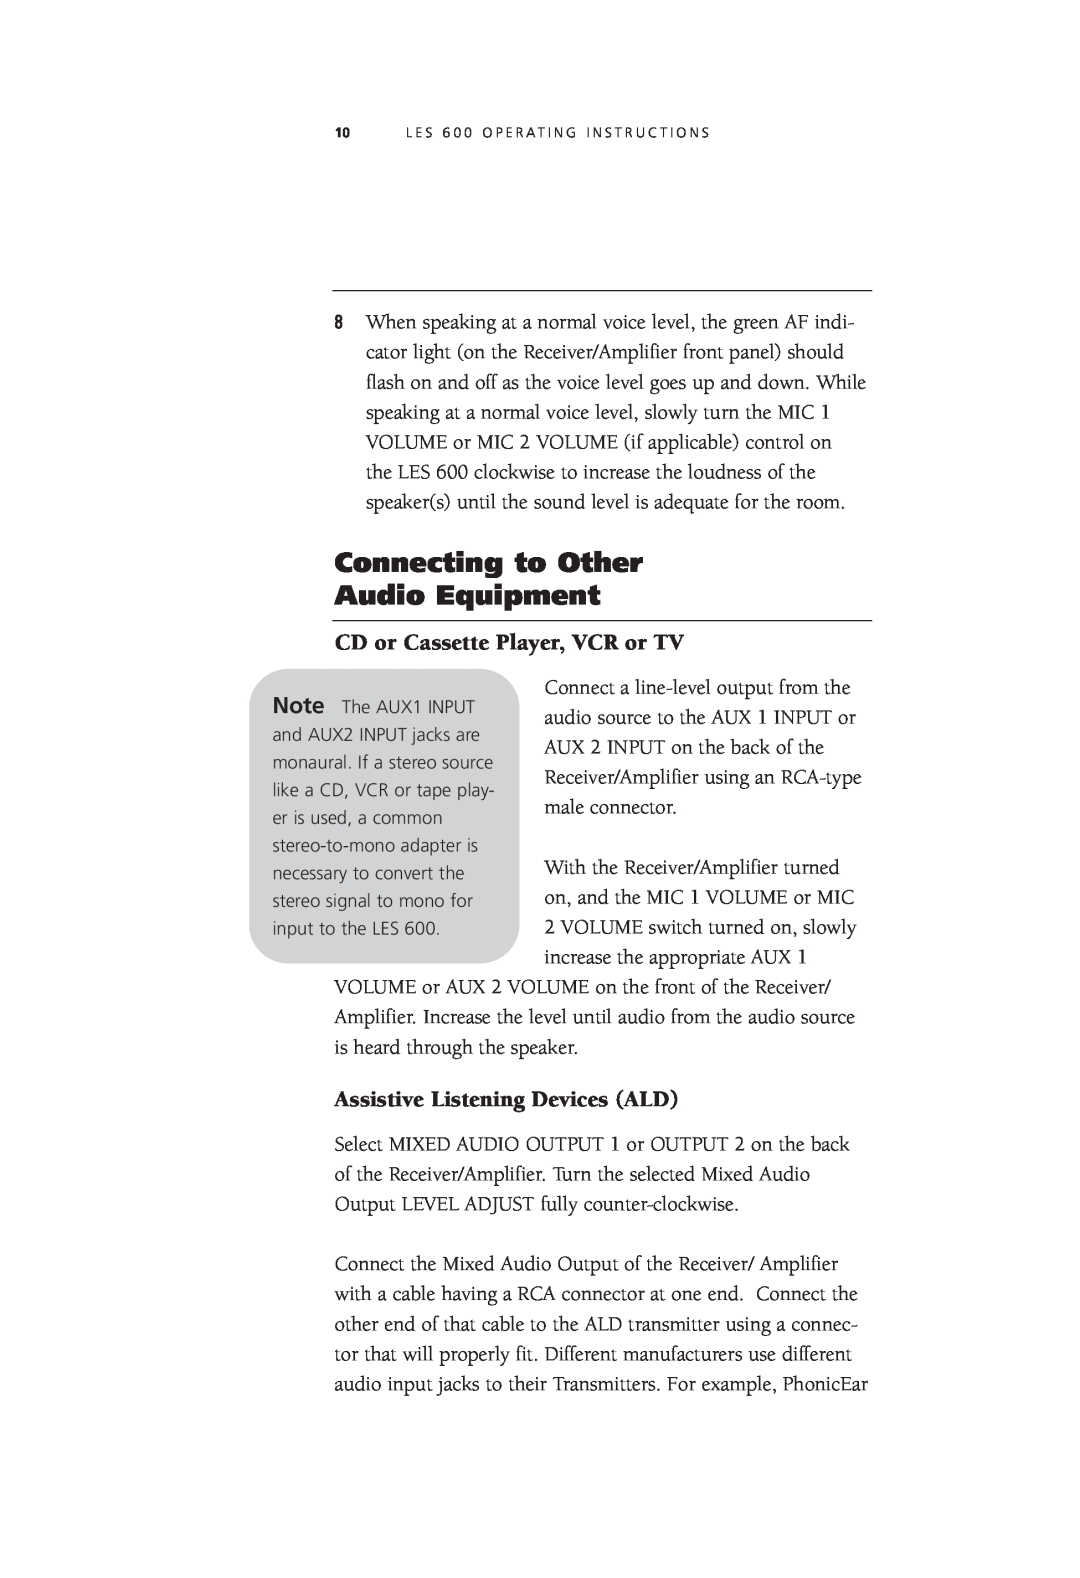 LightSpeed Technologies LES 600 Series user manual Connecting to Other Audio Equipment, CD or Cassette Player, VCR or TV 